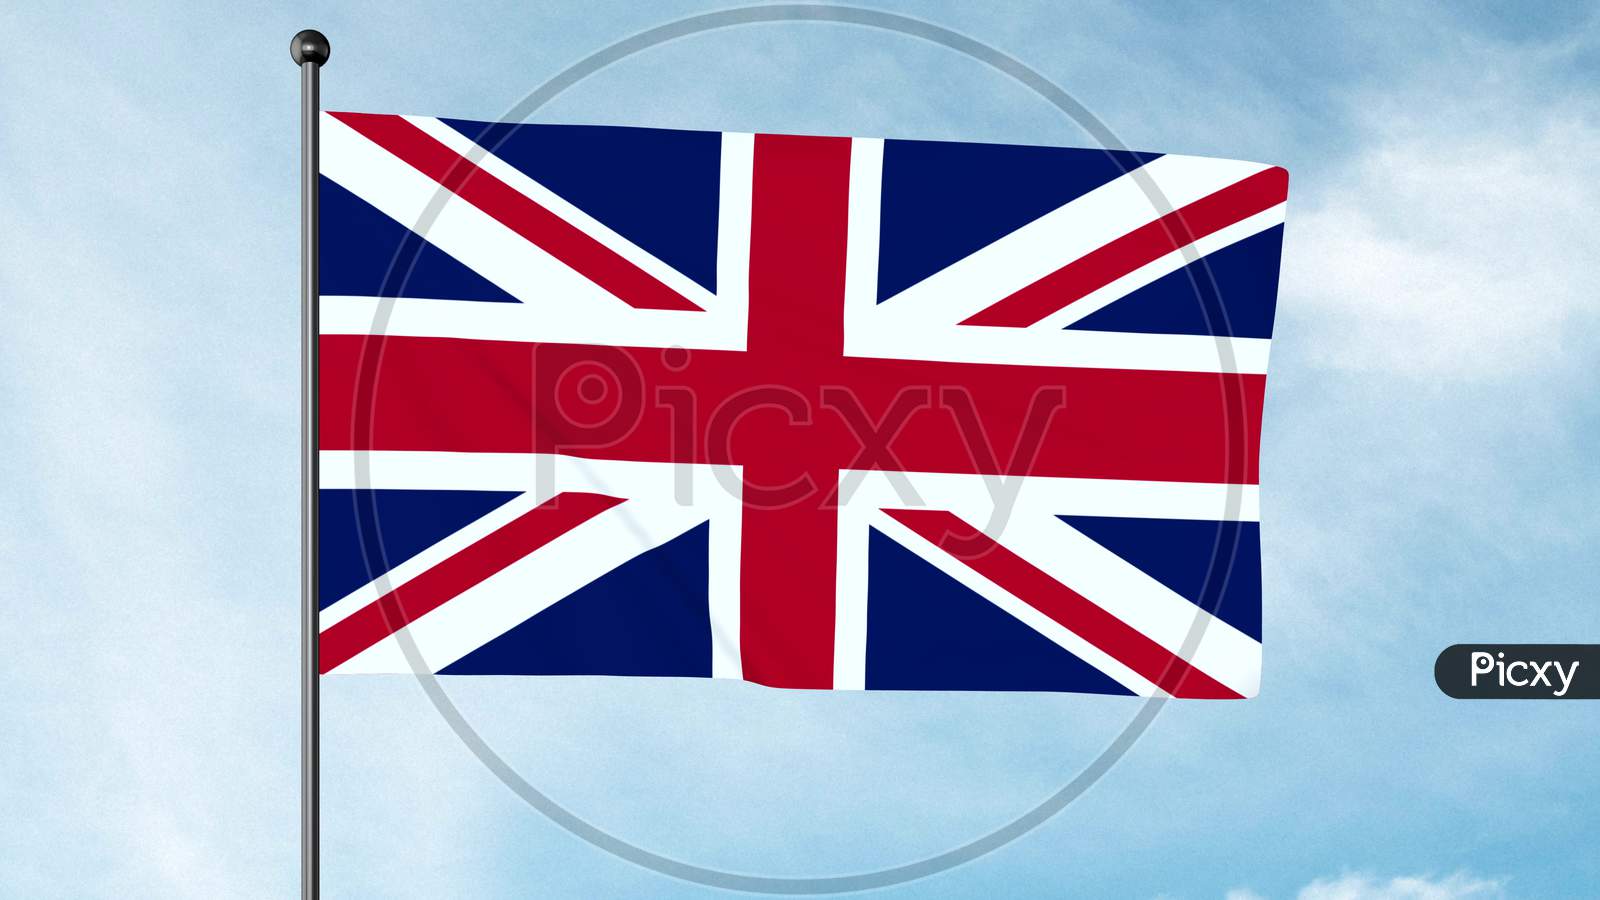 3D Illustration The Union Jack, Or Union Flag, Is The National Flag Of The United Kingdom. Additionally, It Is Used As An Official Flag In Some Of The Smaller British Overseas Territories.